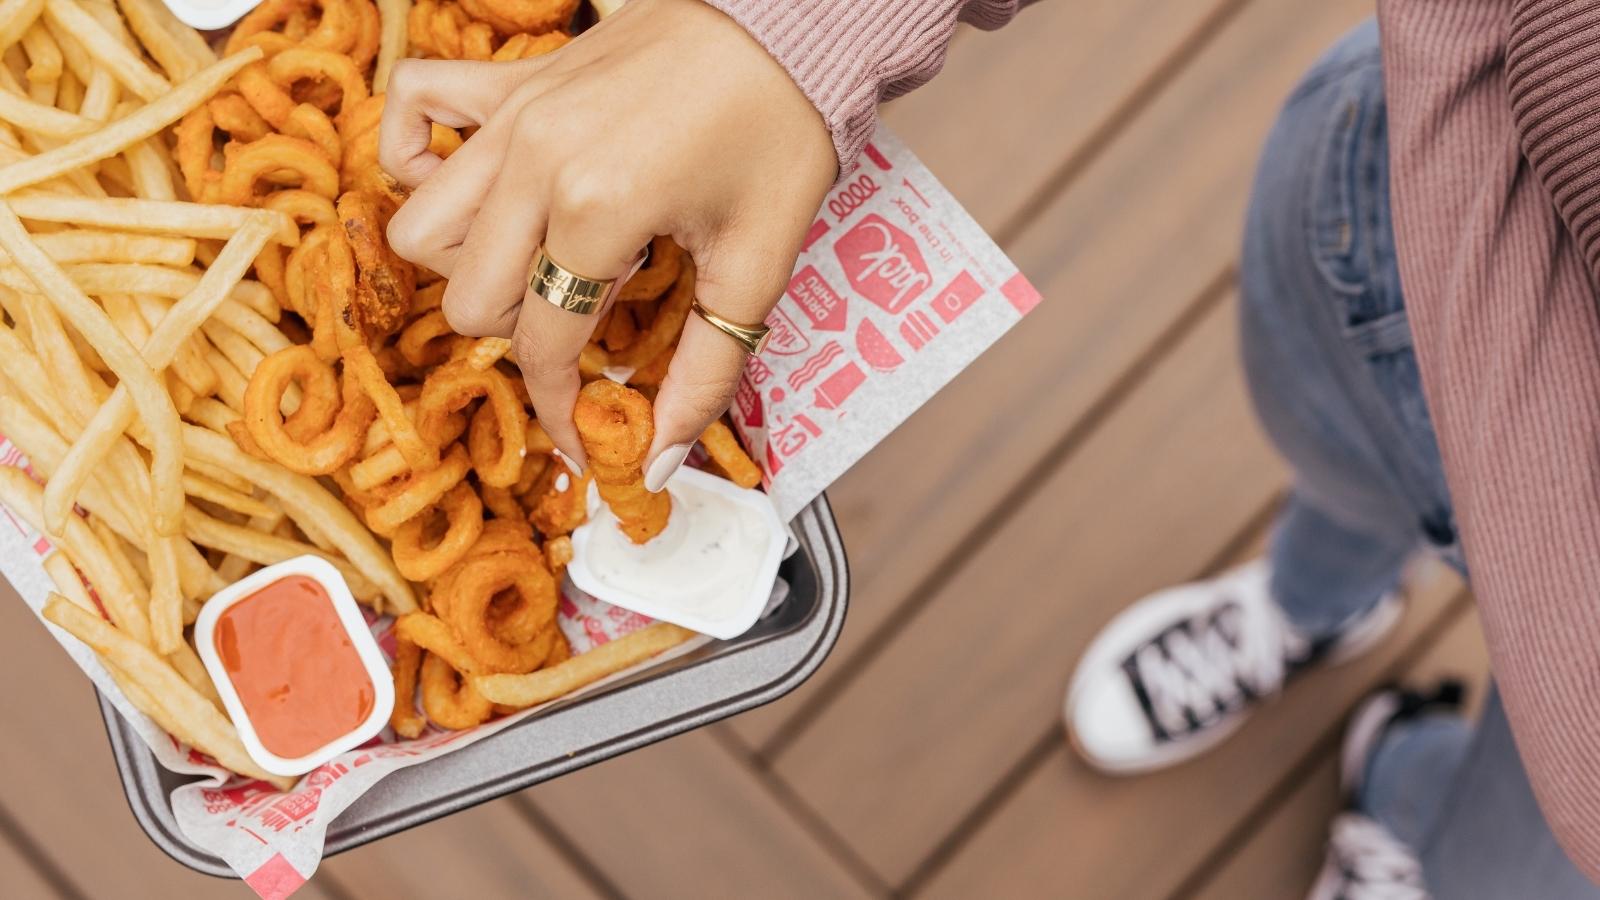 Jack in the Box vs Wendy's: Which Franchise Is Best?